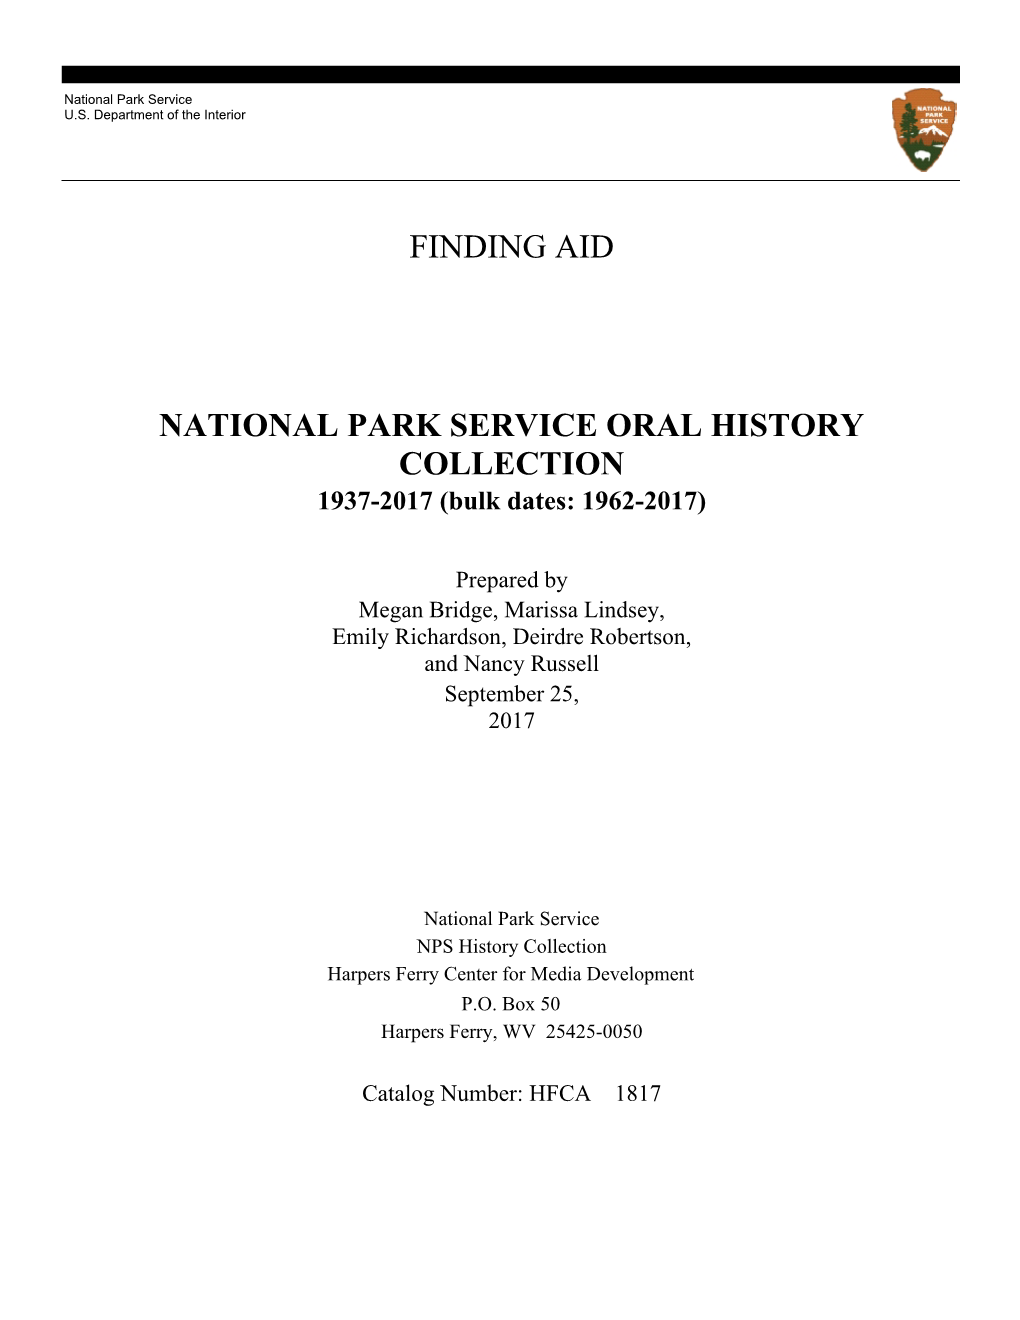 NATIONAL PARK SERVICE ORAL HISTORY COLLECTION 1937-2017 (Bulk Dates: 1962-2017)